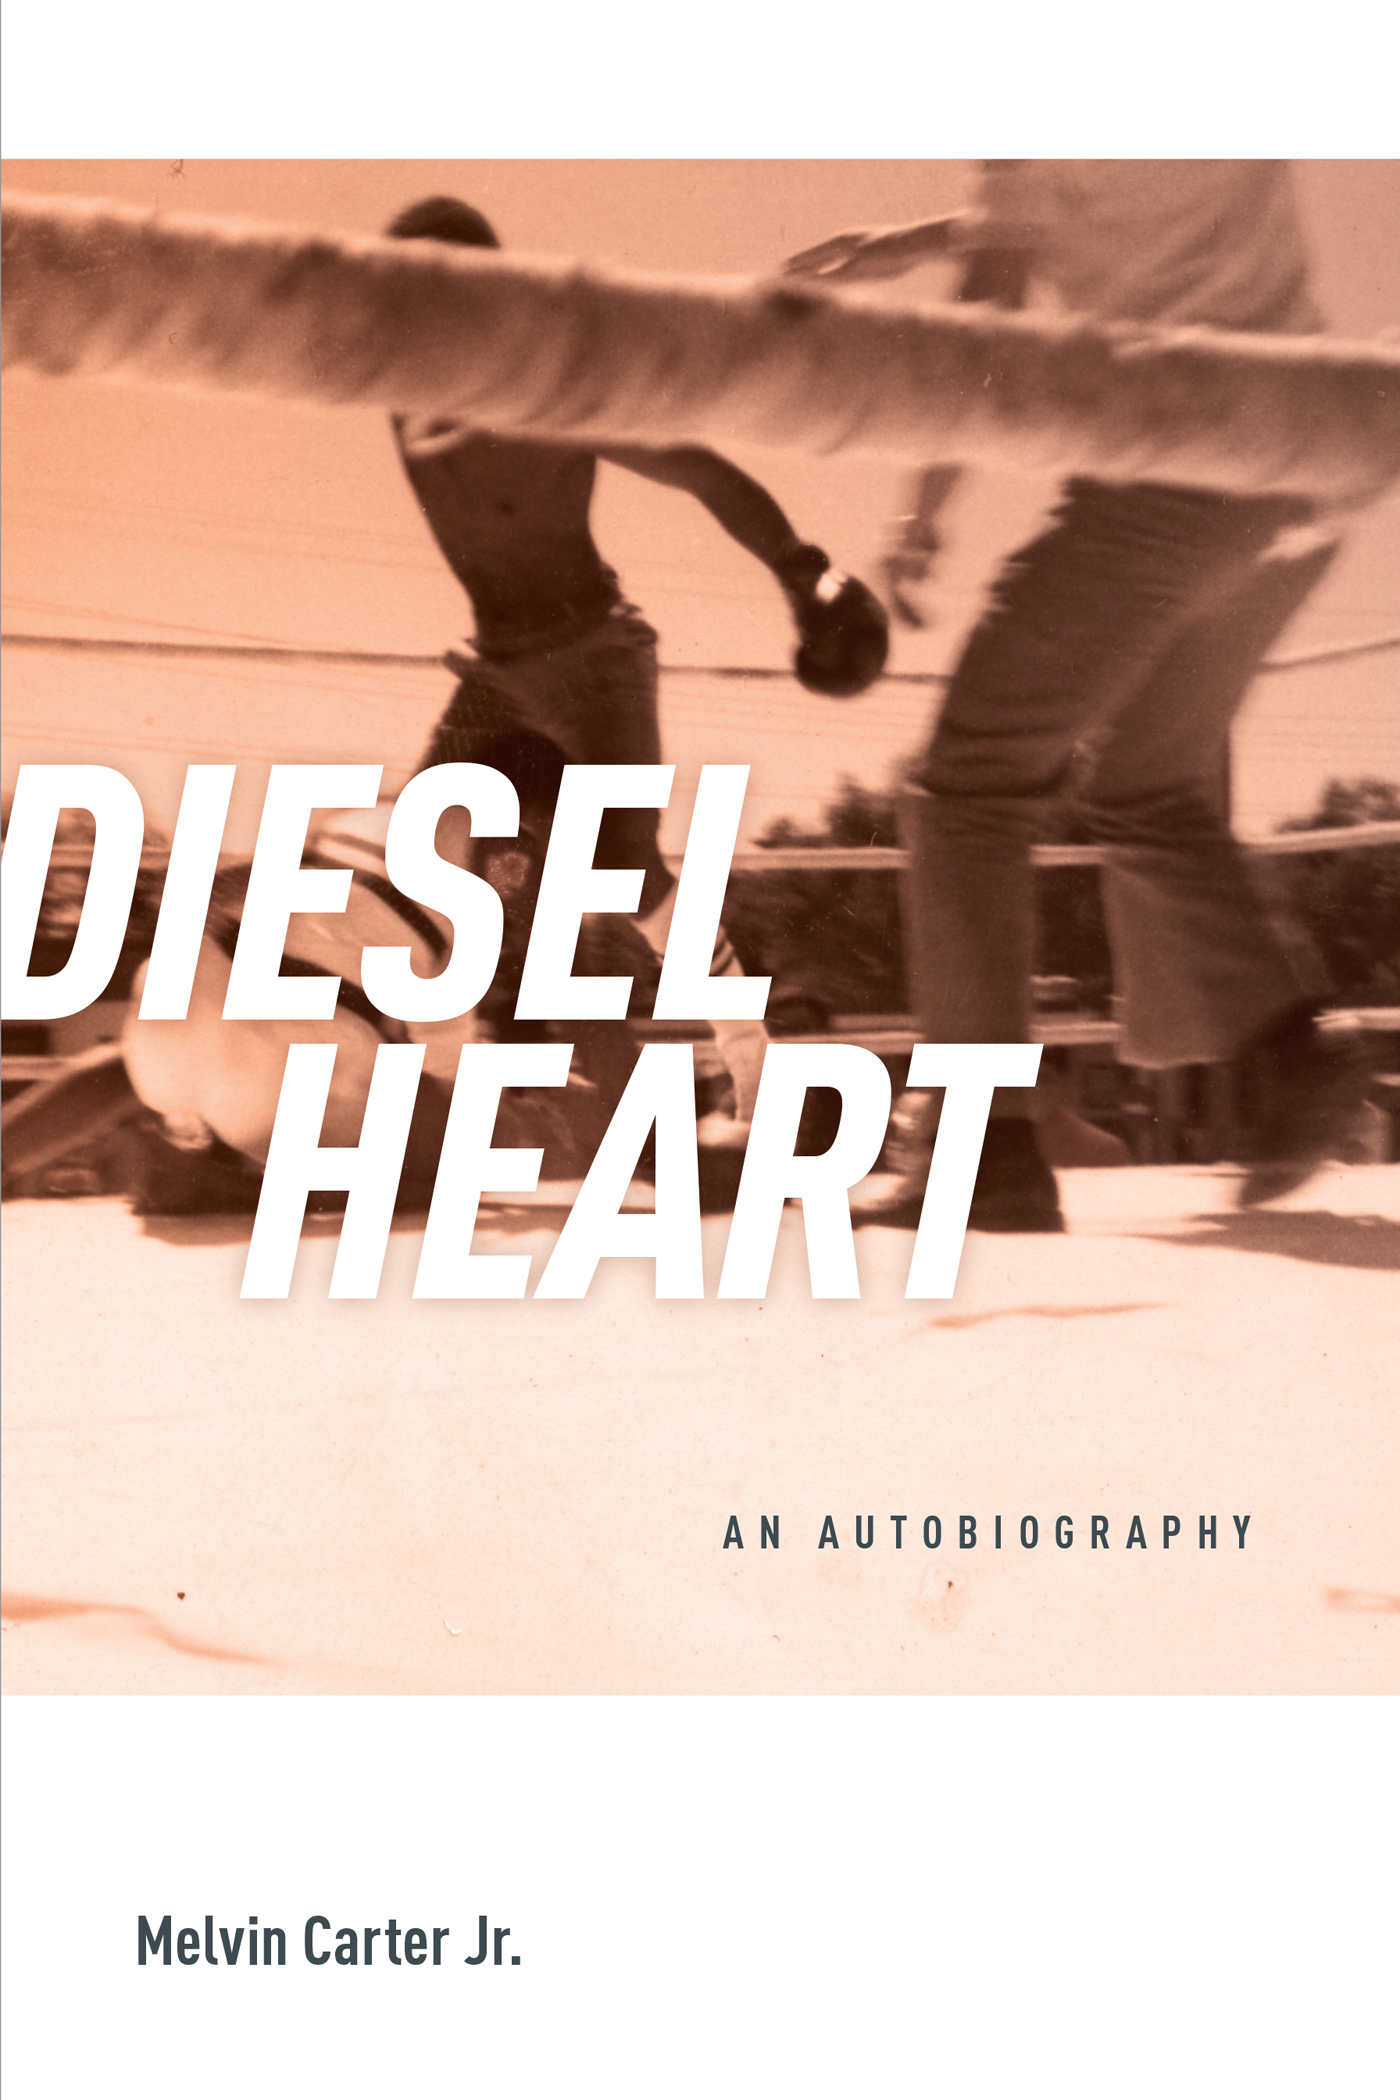 Diesel heart an autobiography - image 1